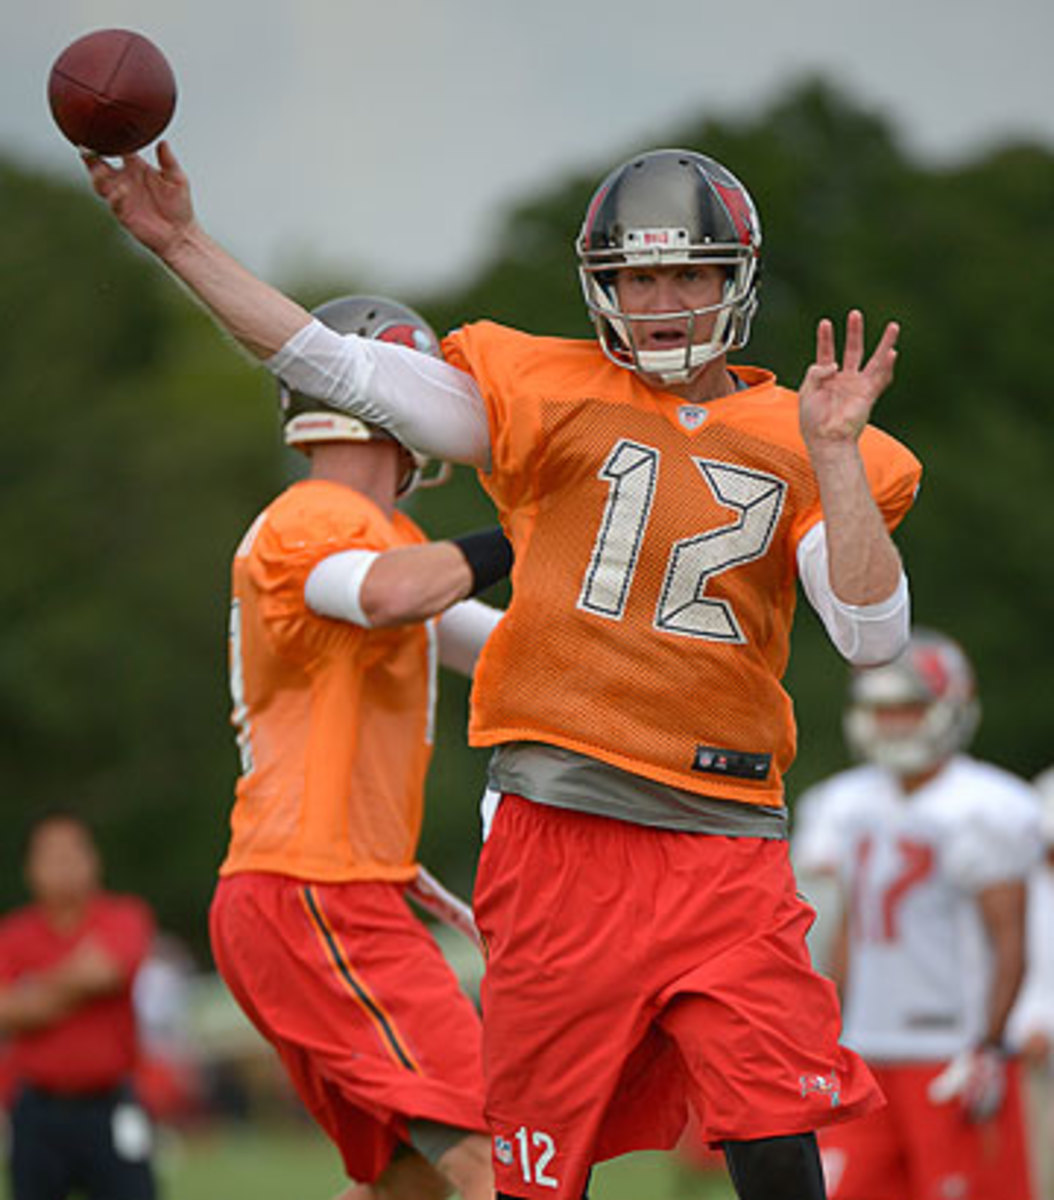 If Josh McCown holds his own at quarterback, the Bucs could contend in the NFC South. (Phelan M. Ebenhack/AP)